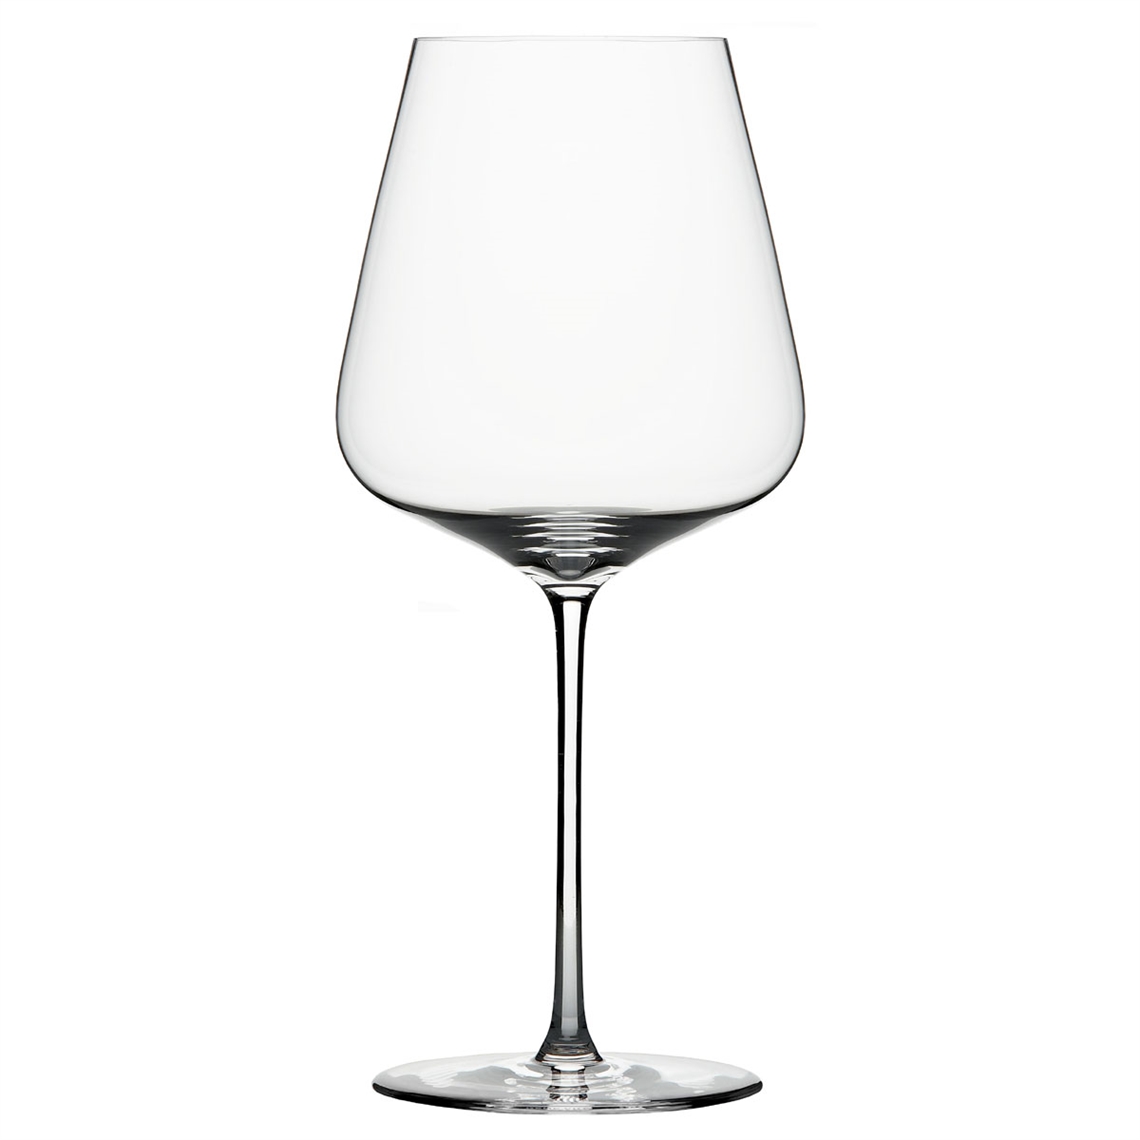 View more burgundy wine glasses from our Premium Mouth Blown Glassware range